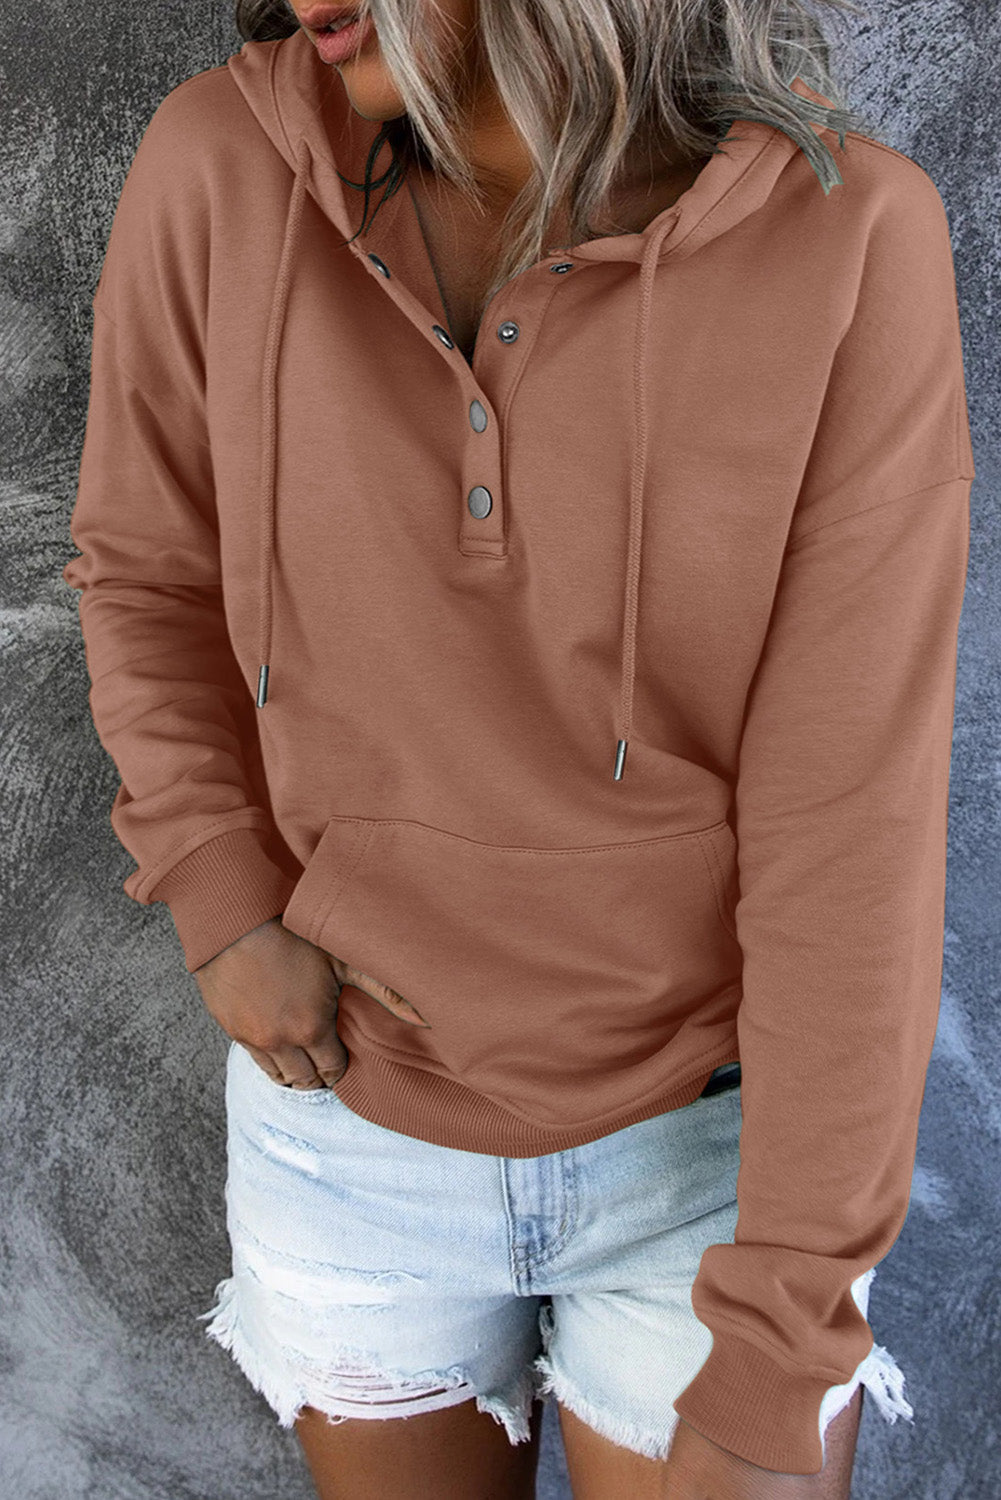 Dropped Shoulder Long Sleeve Hoodie with Pocket - Brown / S - Women’s Clothing & Accessories - Shirts & Tops - 25 - 2024